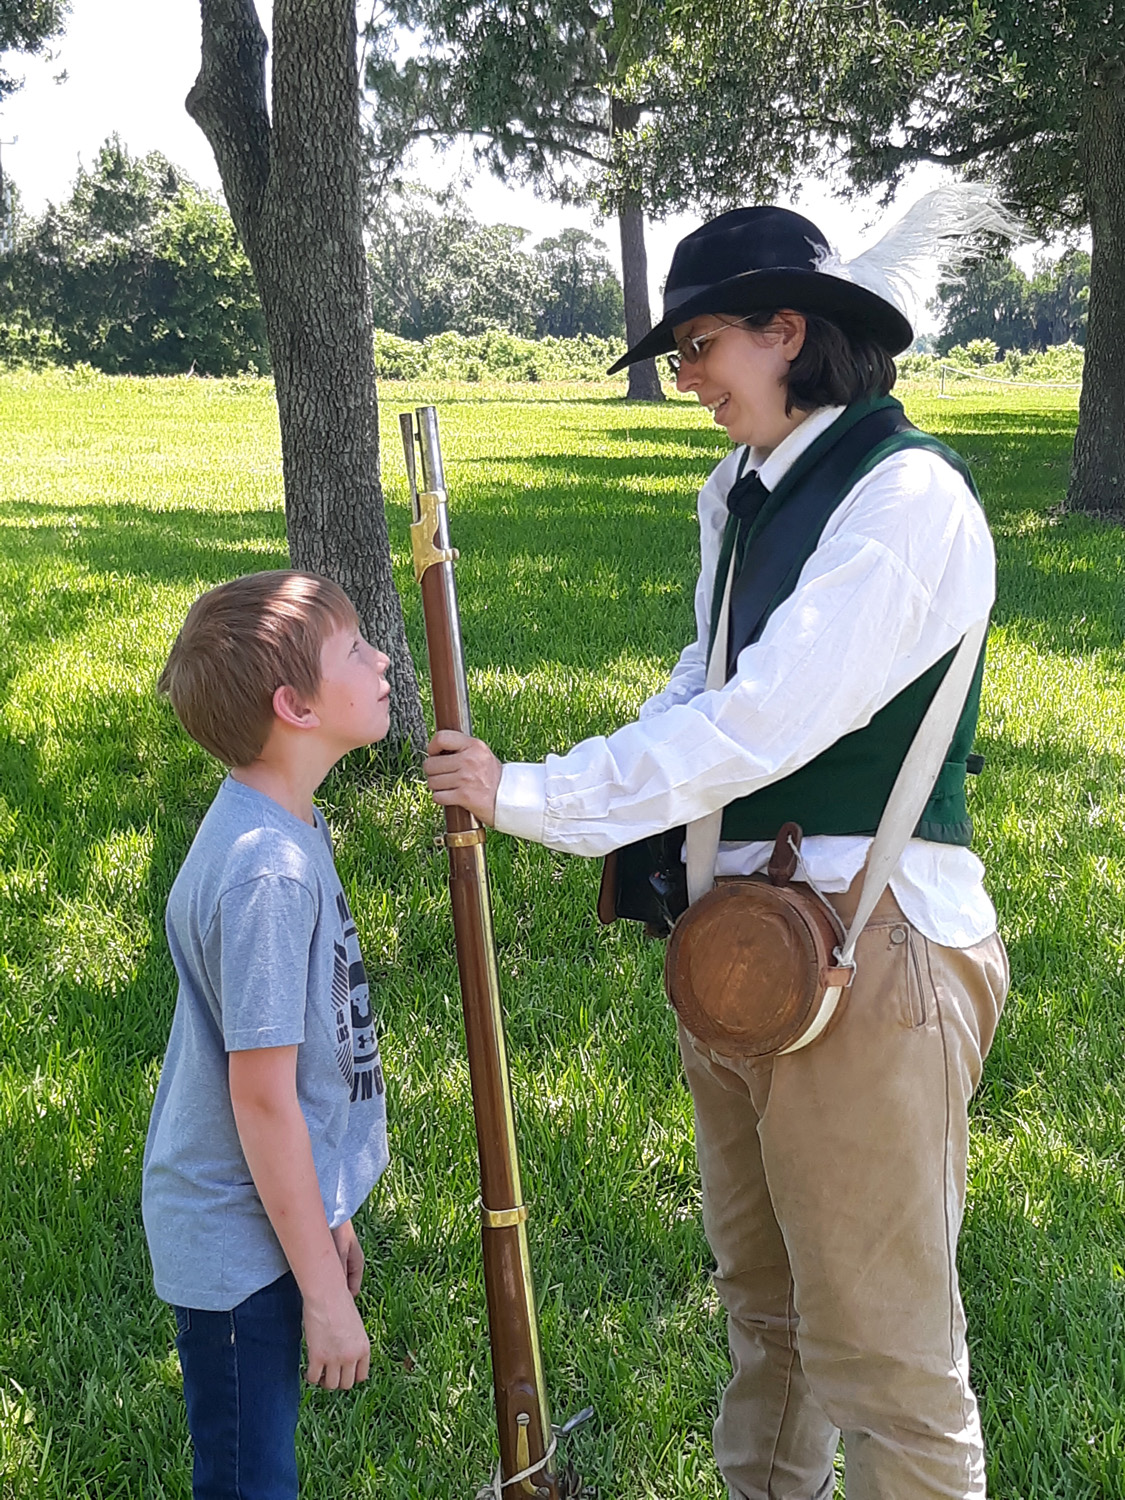 An educator shows a reproduction weapon to a child.